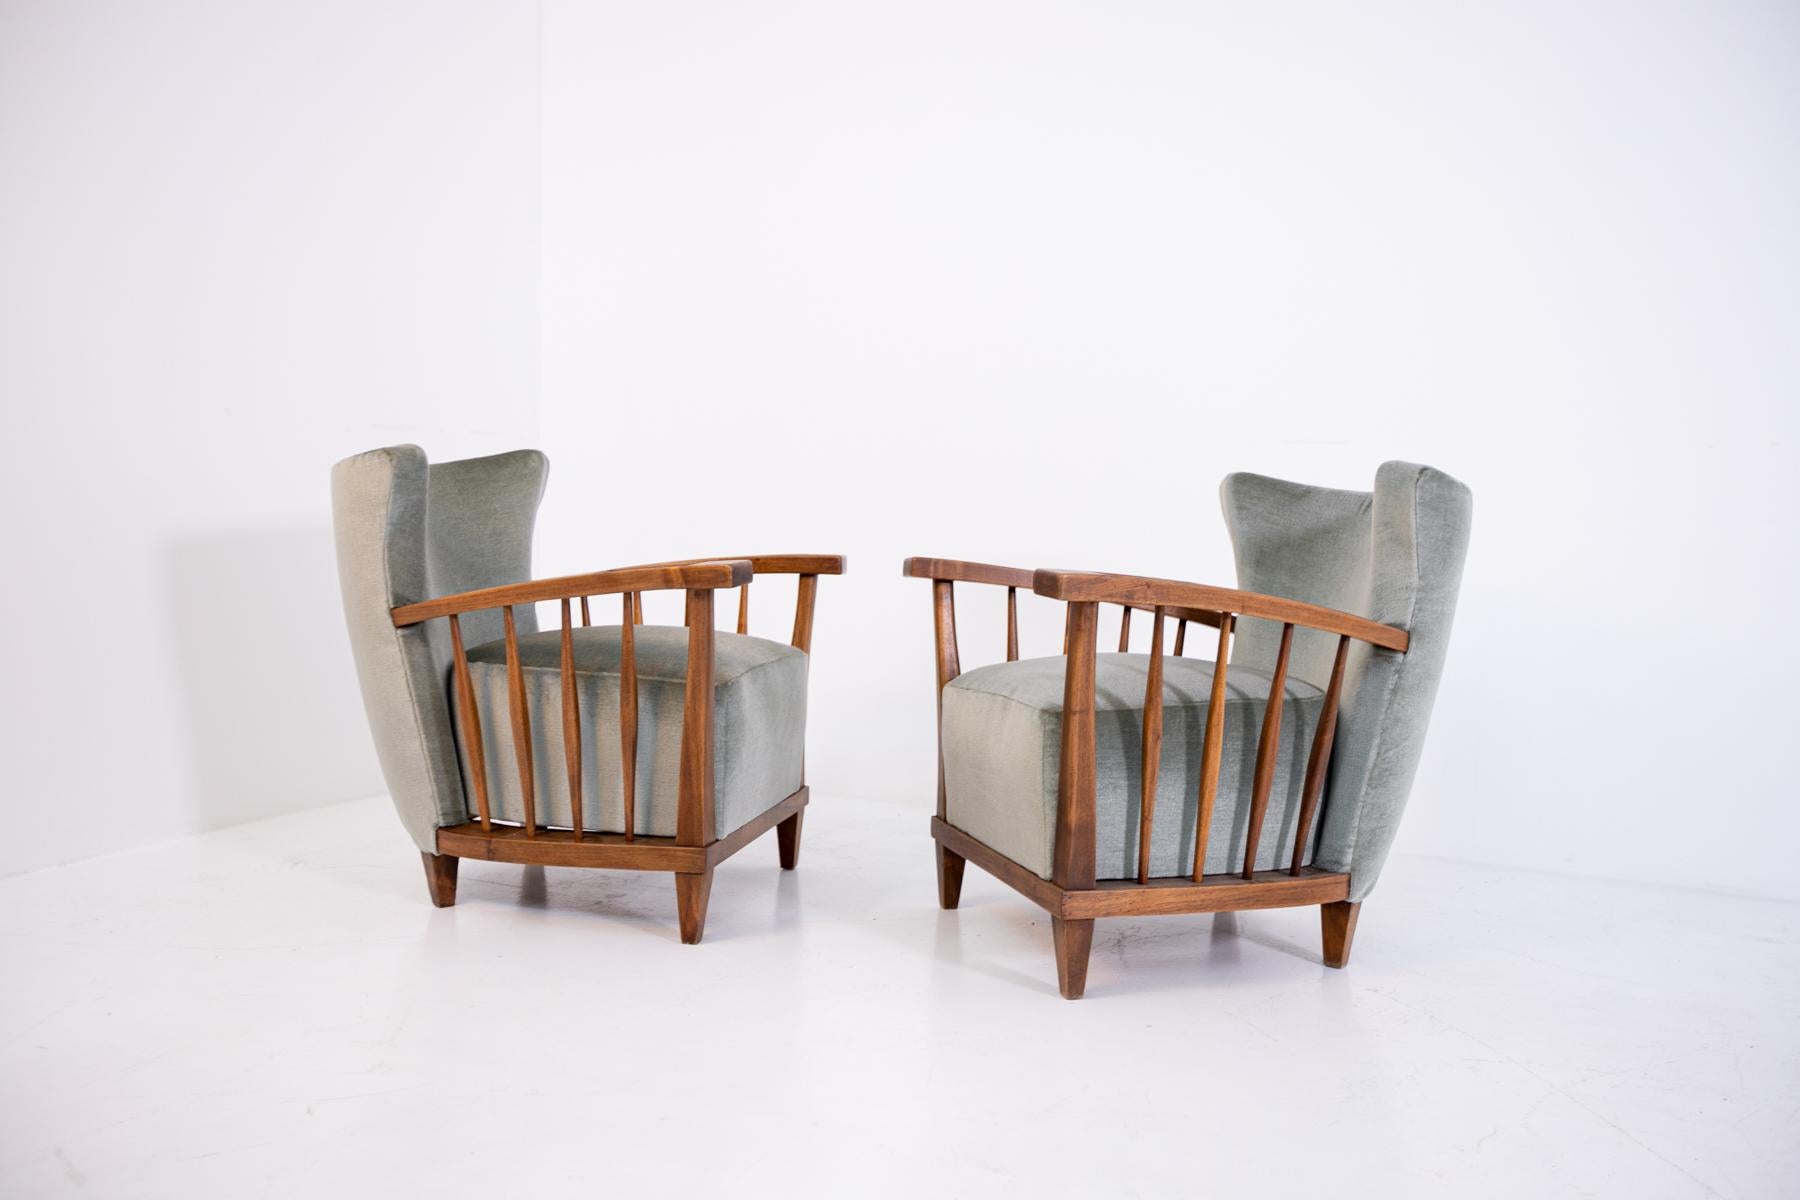 Gorgeous pair of Maurizio Tempestini armchairs from the 1950s.
The structure of Maurizio Tempestini armchairs was made of sturdy walnut wood, while the fabric used to cover them is gray velvet.
The peculiarity of Maurizio Tempestini armchairs are